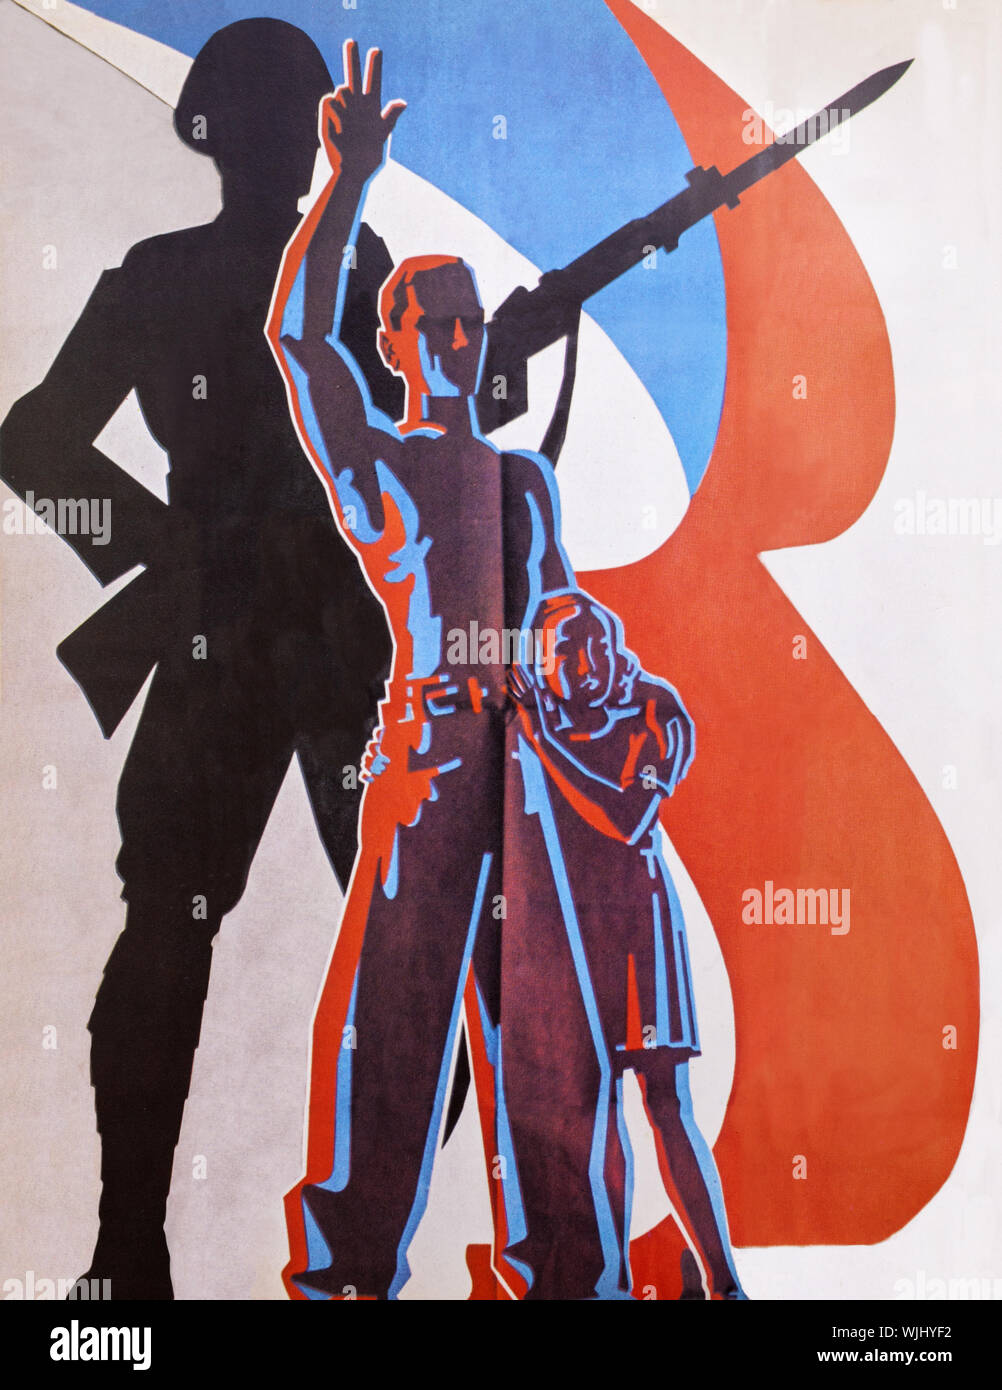 A Czechoslovakian World War Two poster urging its population to 'become soldiers if neccessary', when Hitler made himself the advocate of ethnic Germans living in Czechoslovakia. He triggered the 'Sudeten Crisis' provoked by  Pan-Germanist demands of Germany that the Sudetenland be annexed to Germany, which happened after the later Munich Agreement in 1938. Stock Photo